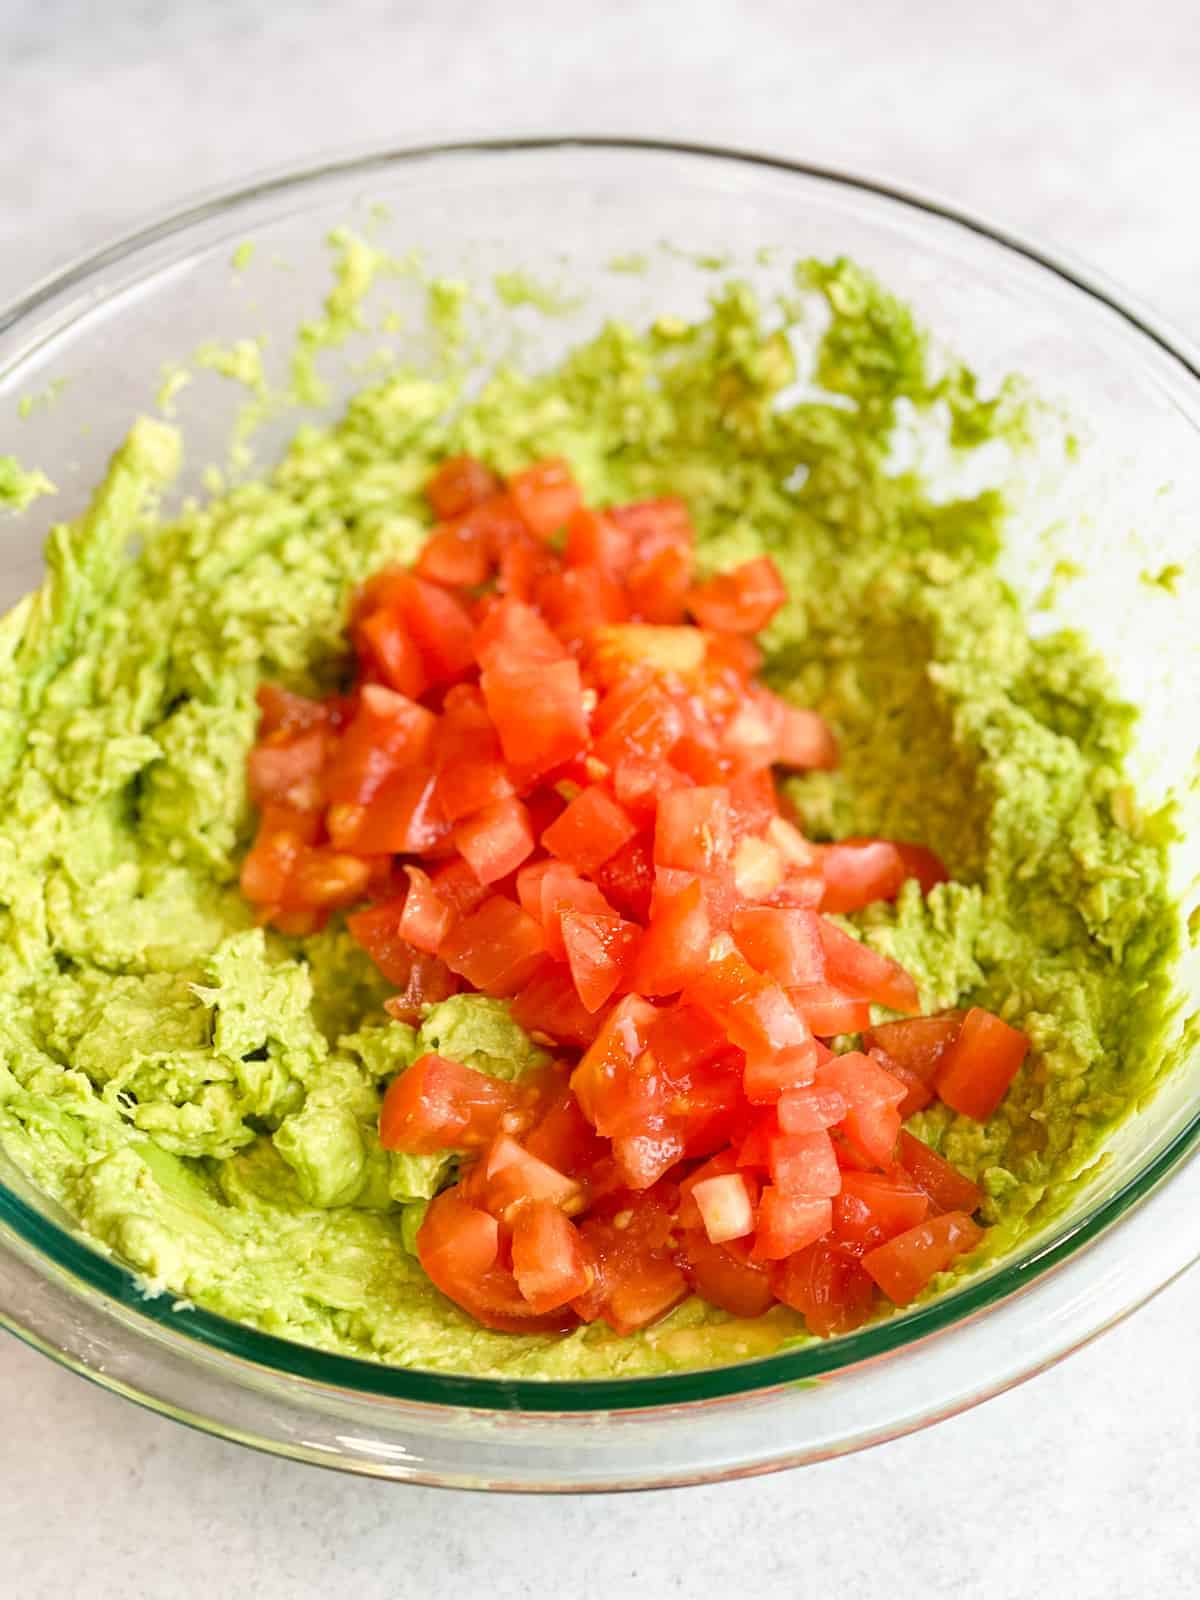 A bowl of mashed avocadoes with squared slices of tomatoes.